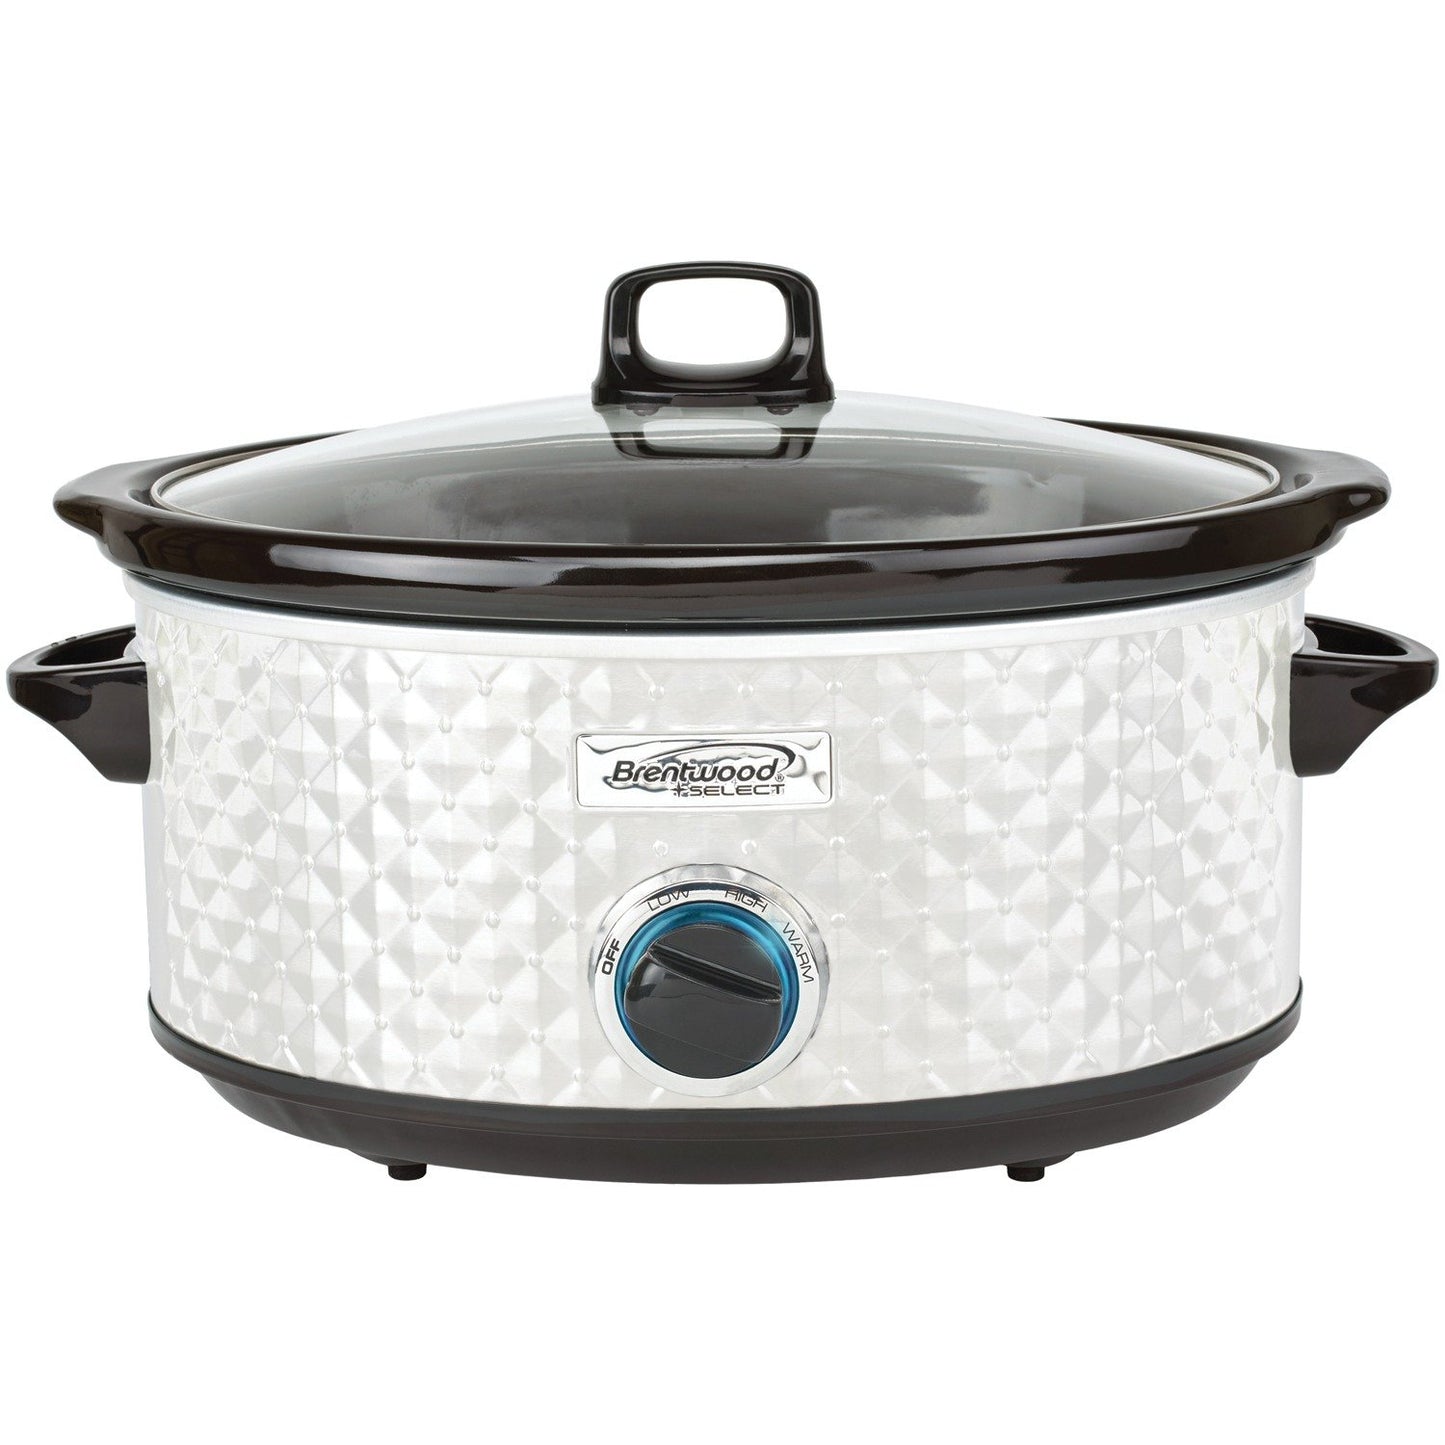 Brentwood Appliances SC-157W 7-Quart Slow Cooker (Pearl White)